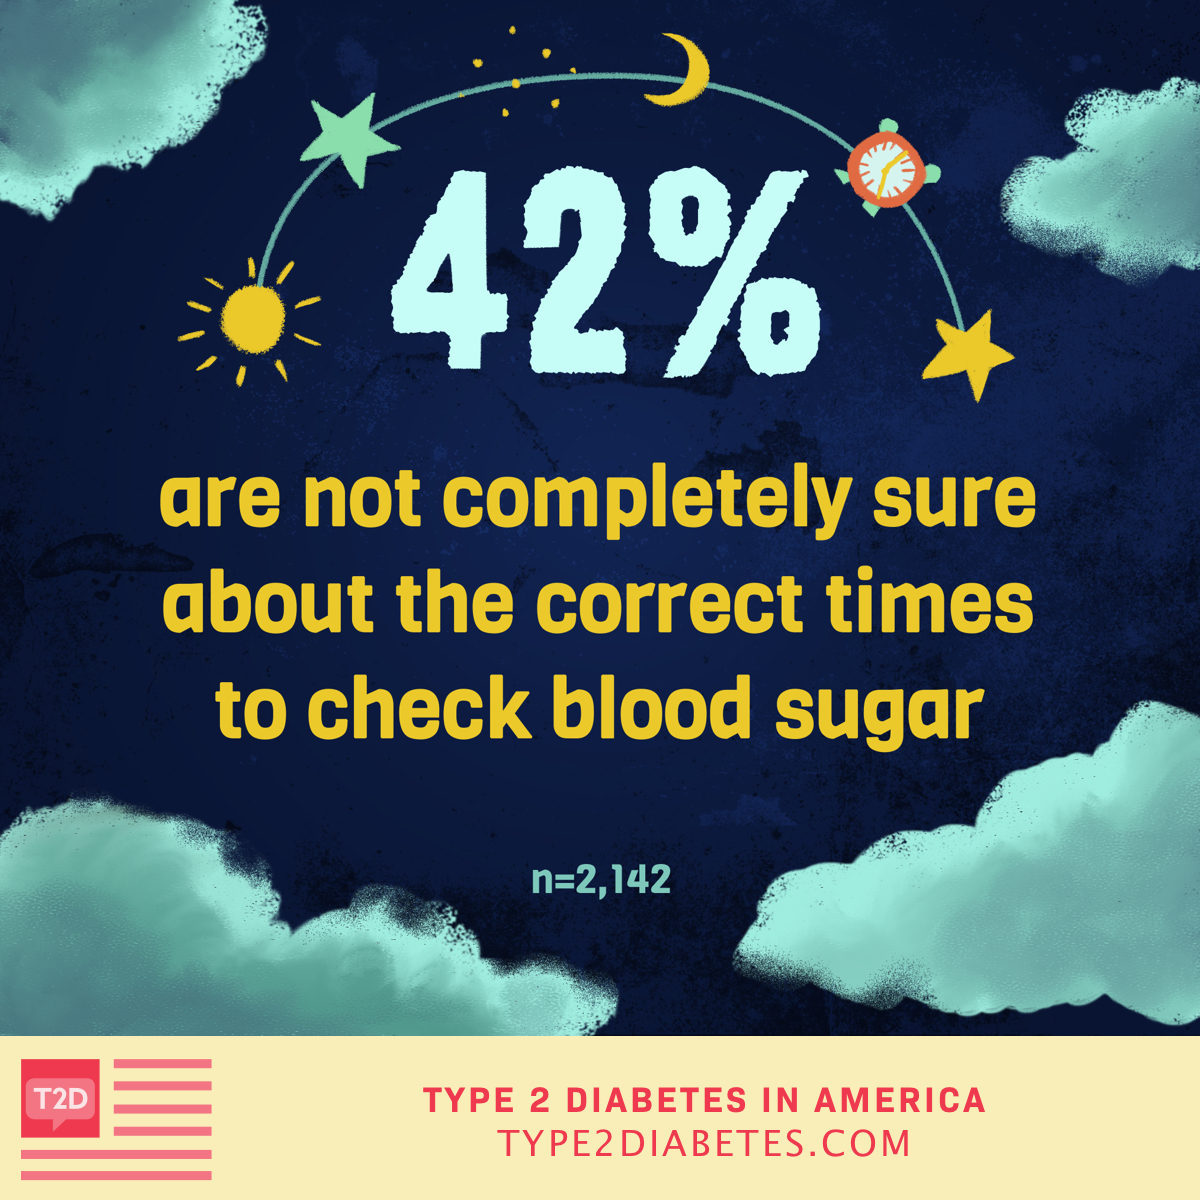 42% of people with type 2 diabetes aren’t completely sure about the correct times to check blood sugar.